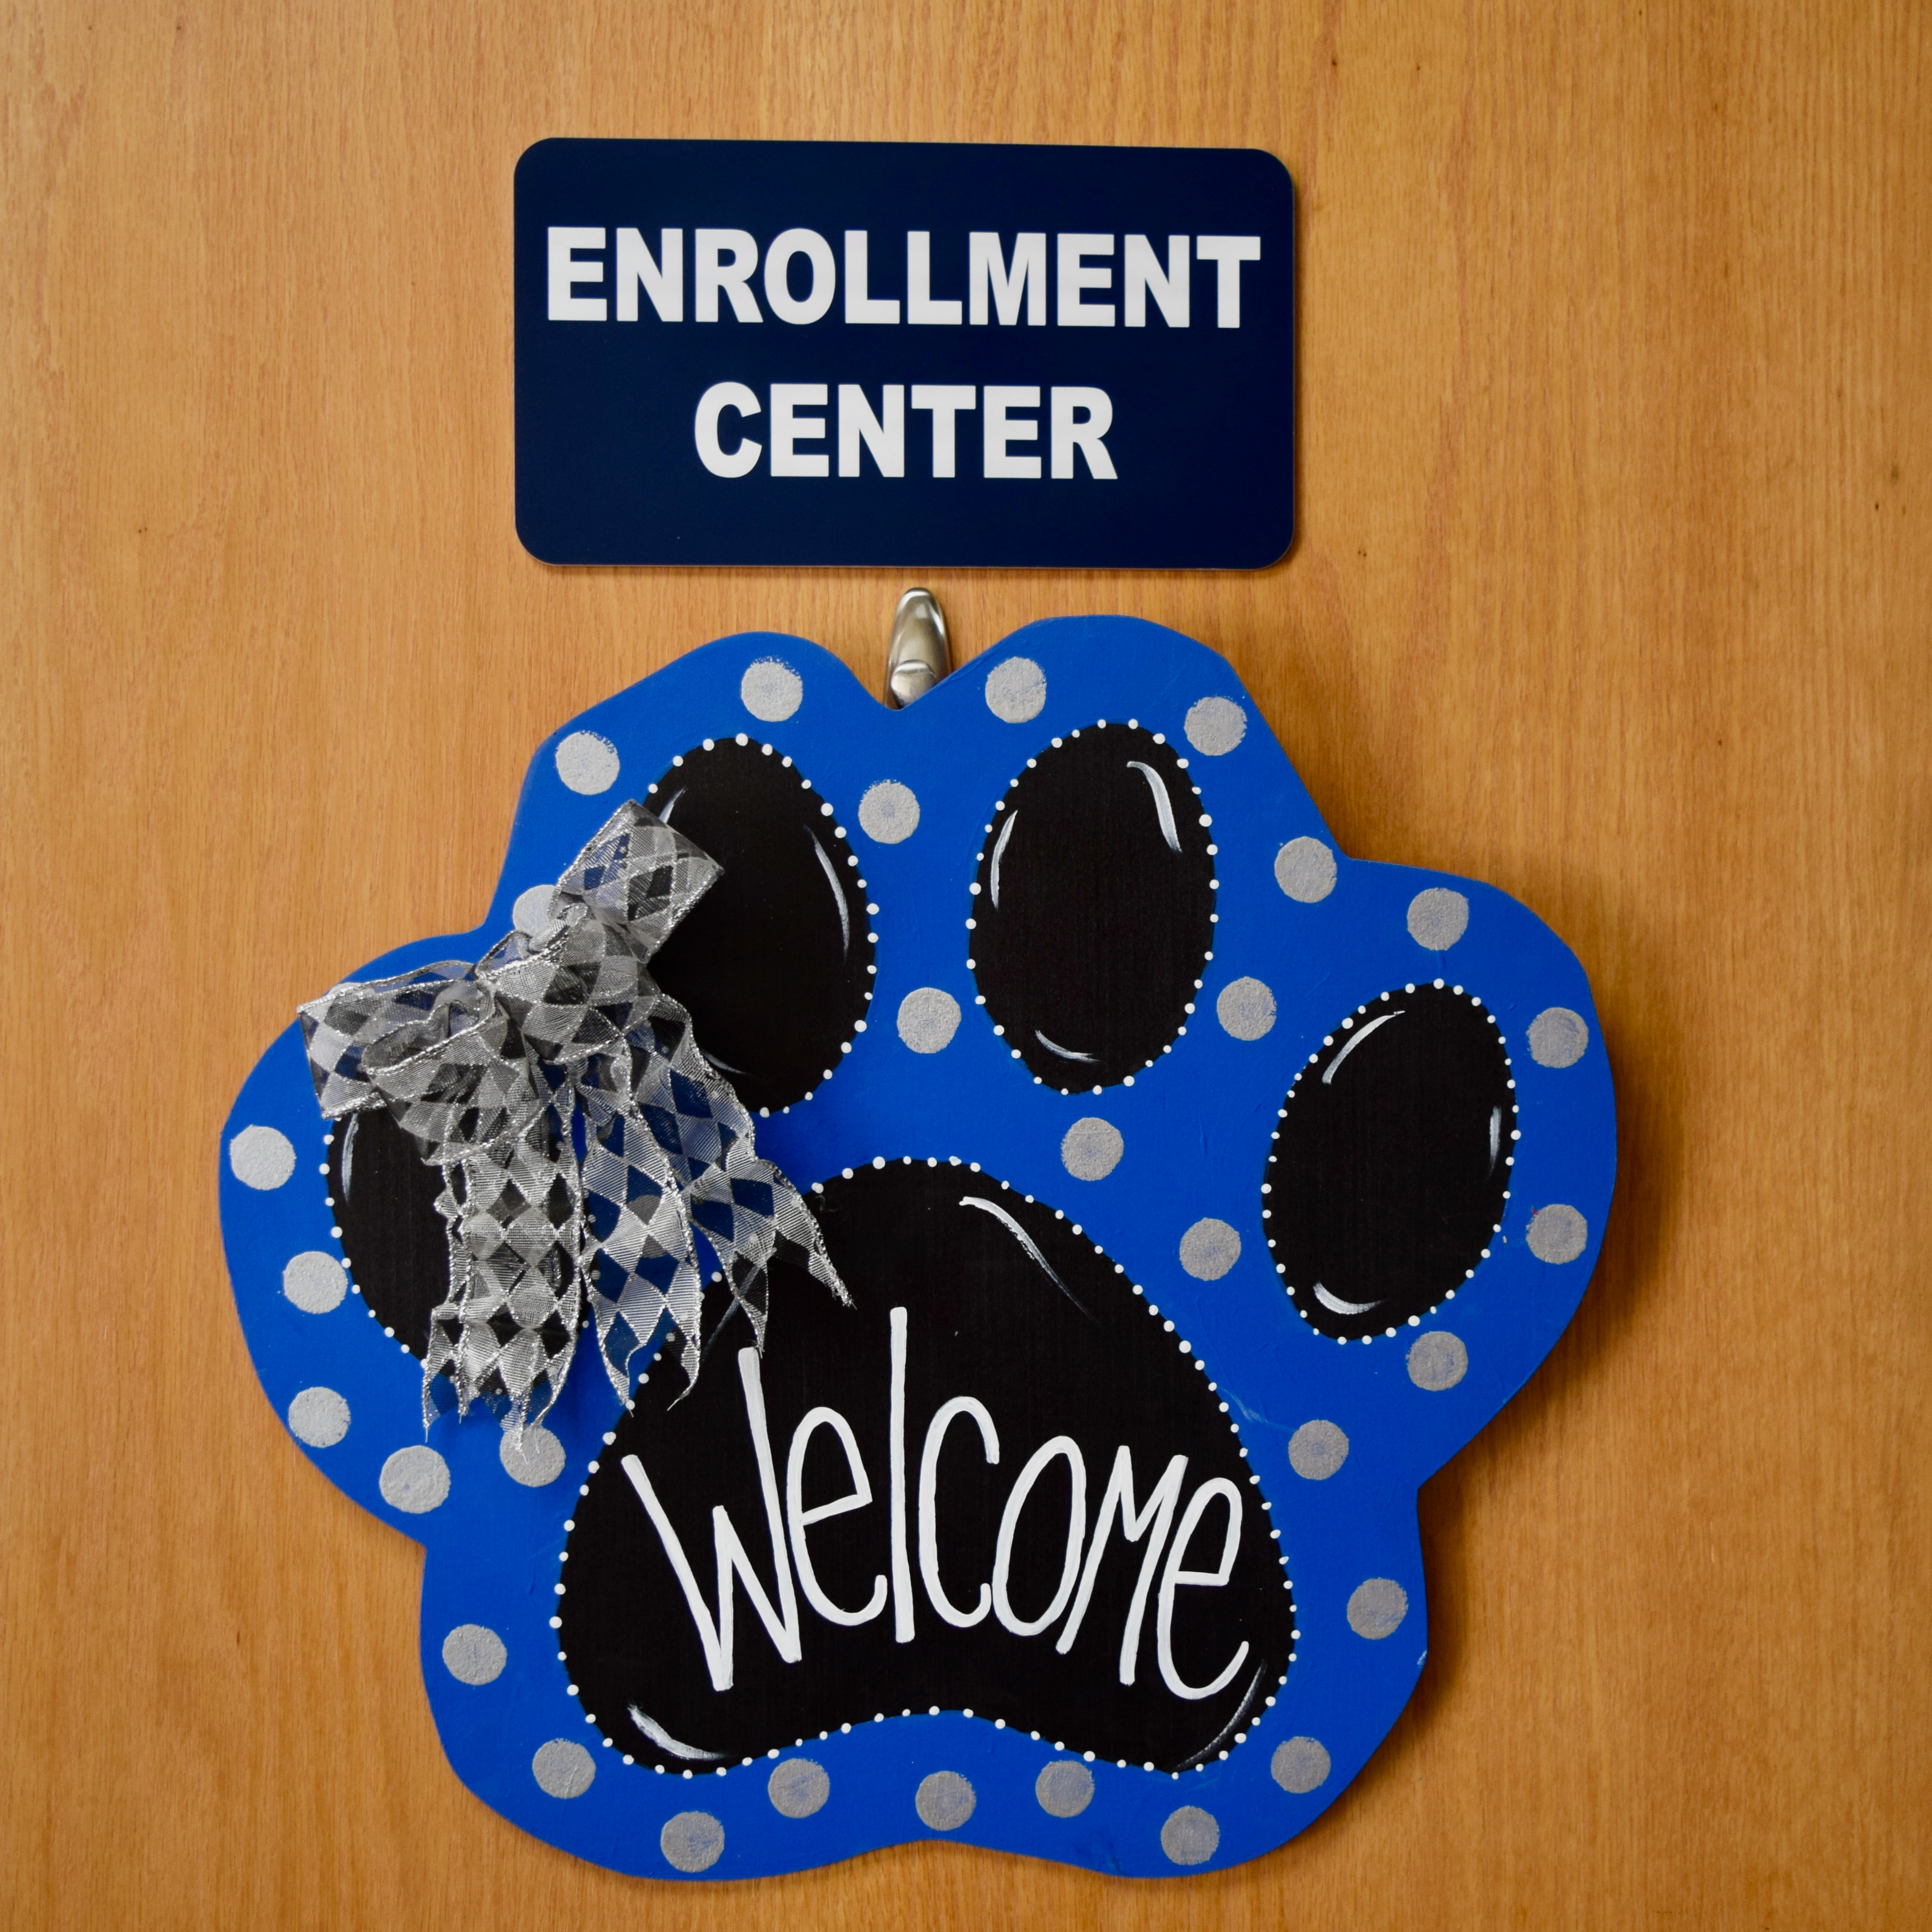 the words enrollment center above a blue wolf paw shaped sign that reads welcome